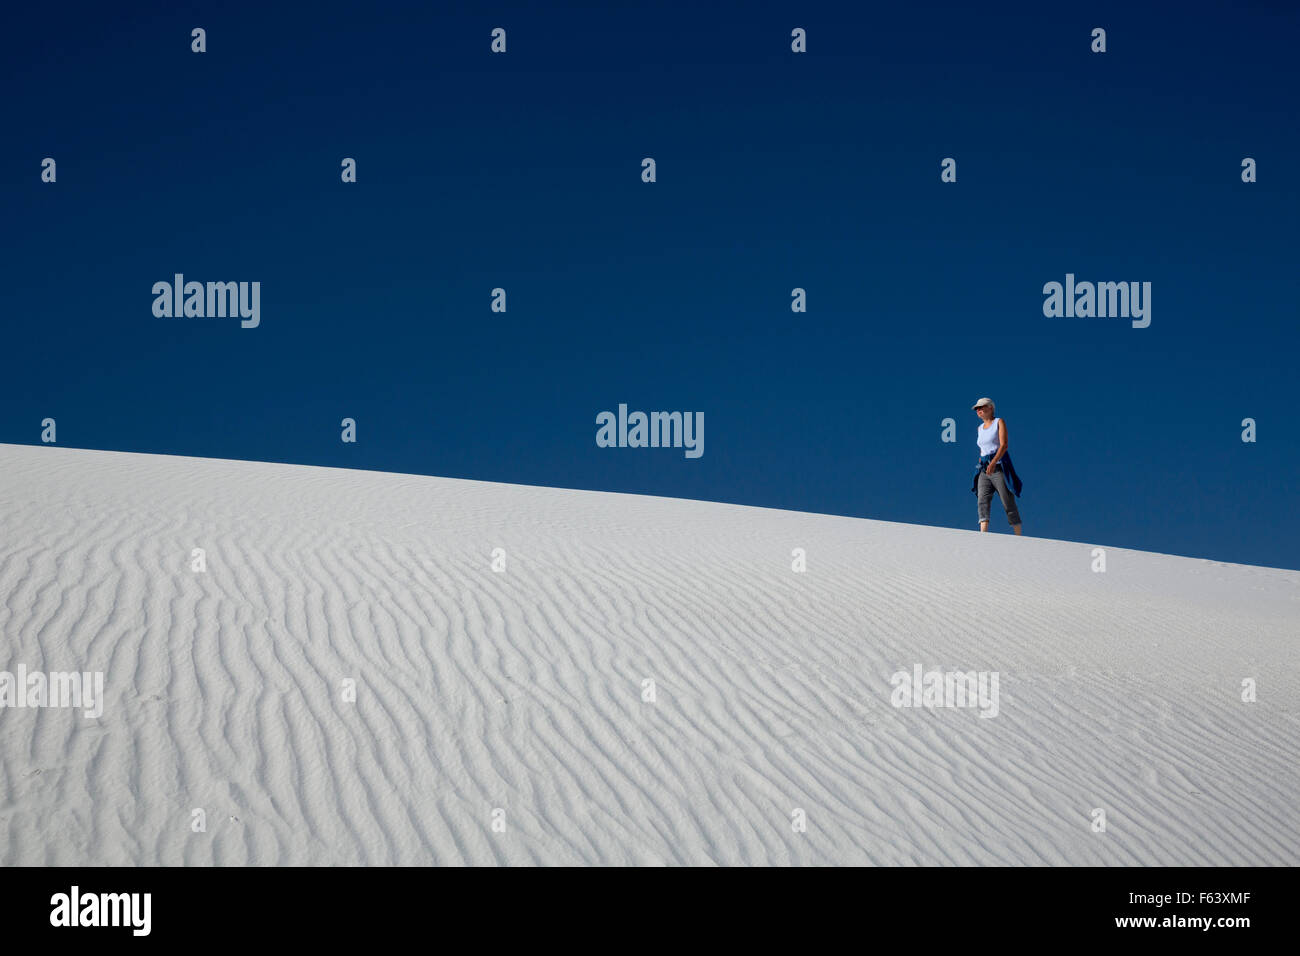 Alamogordo, New Mexico - Susan Newell, 66, hikes in White Sands National Monument. Stock Photo